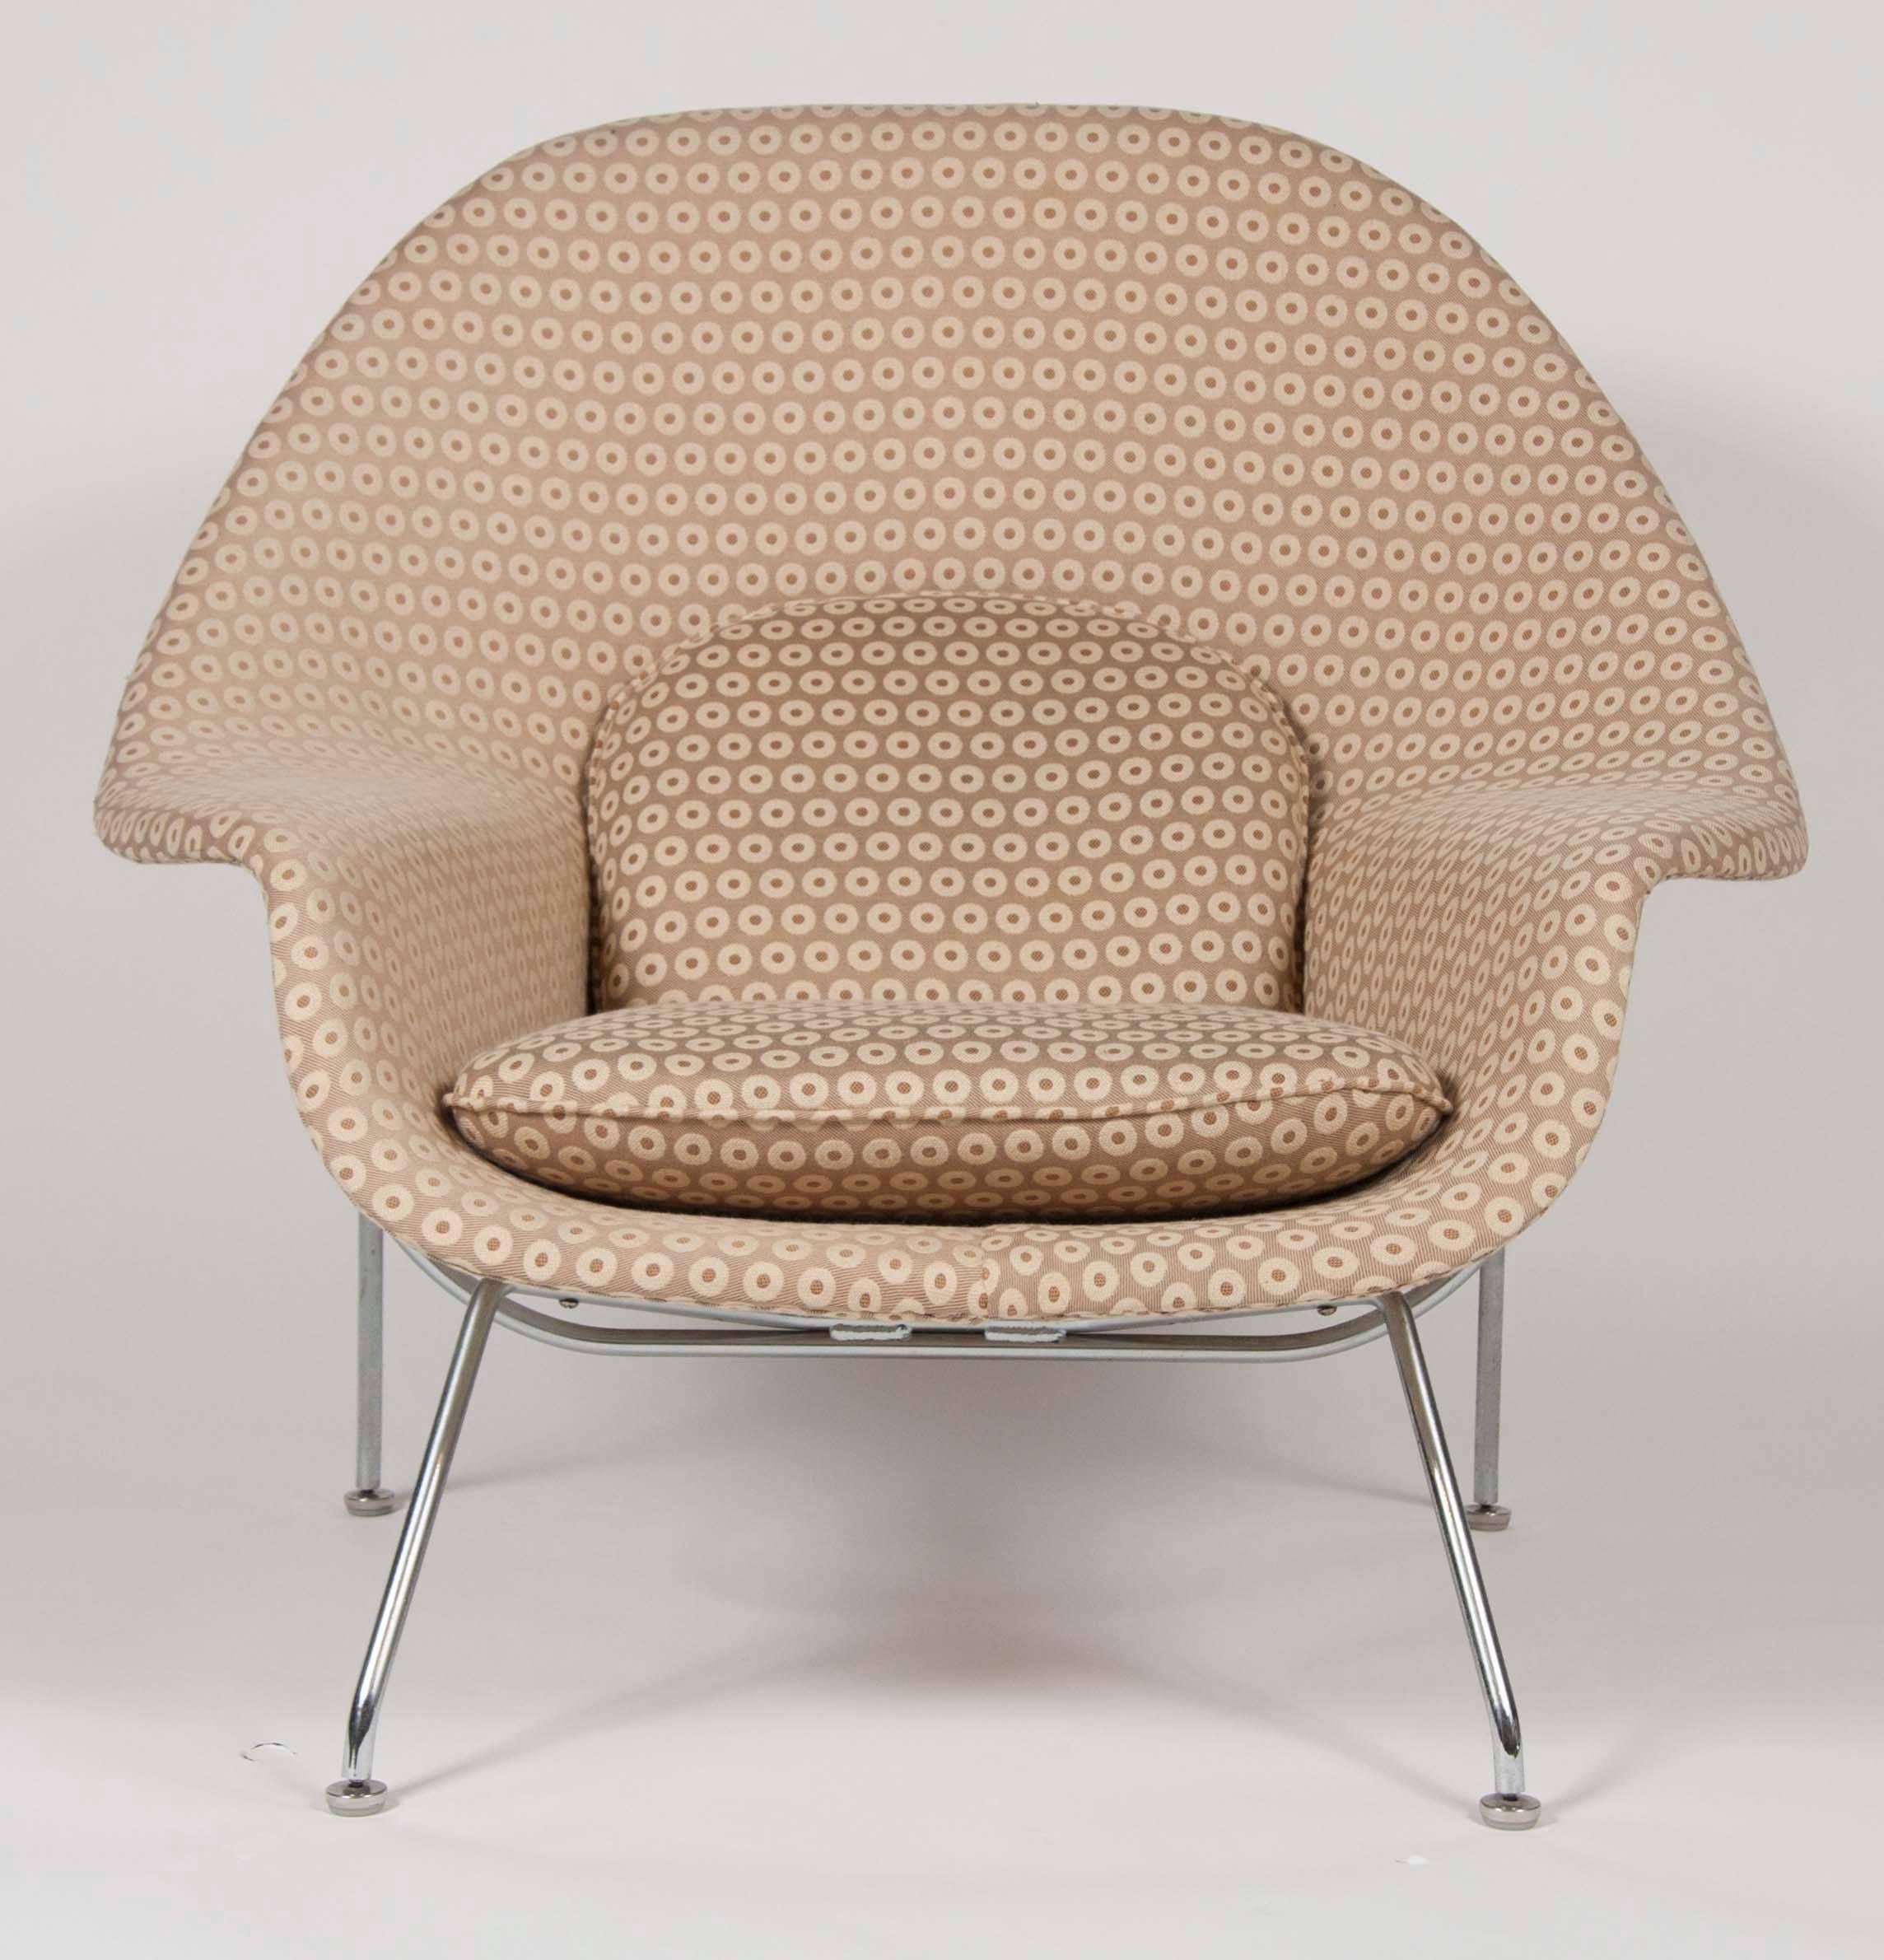 A Eero Saarinen womb chair for Knoll. This model is unmarked due to the fact that it has been reupholstered and does not retain its original tags. The chair does retain its cushion clips.